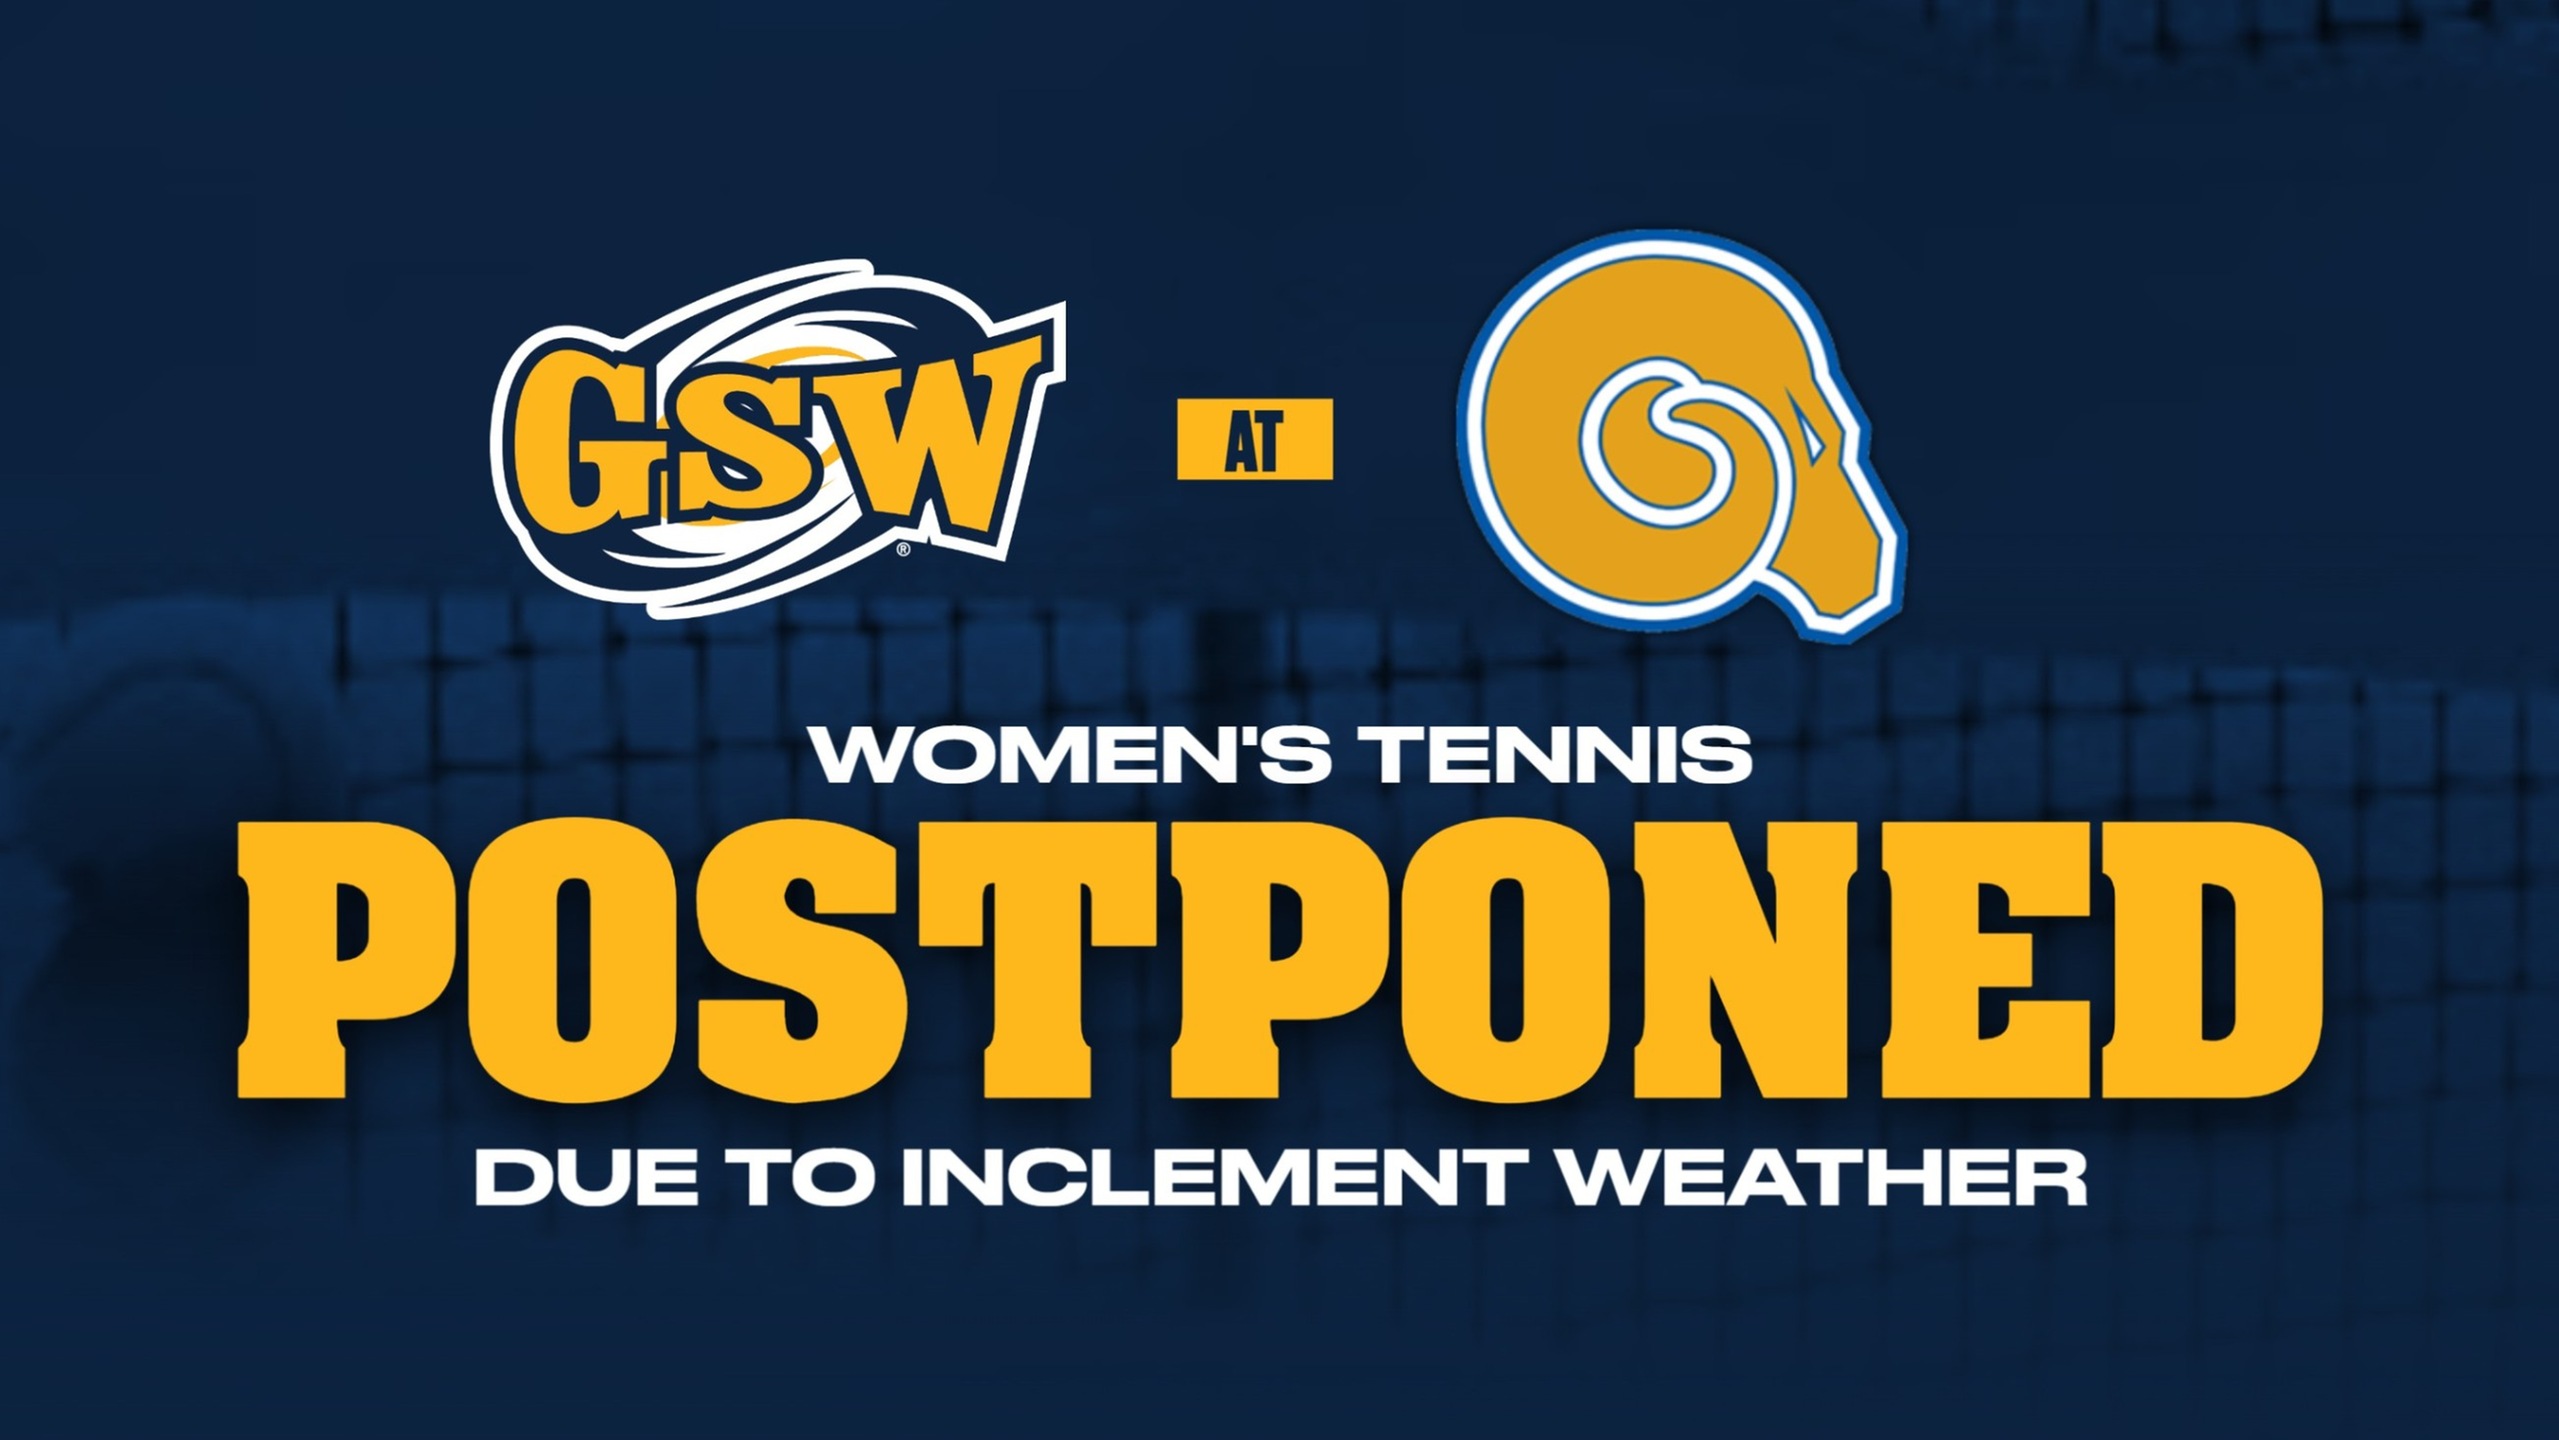 Tuesday Tennis at Albany State Postponed